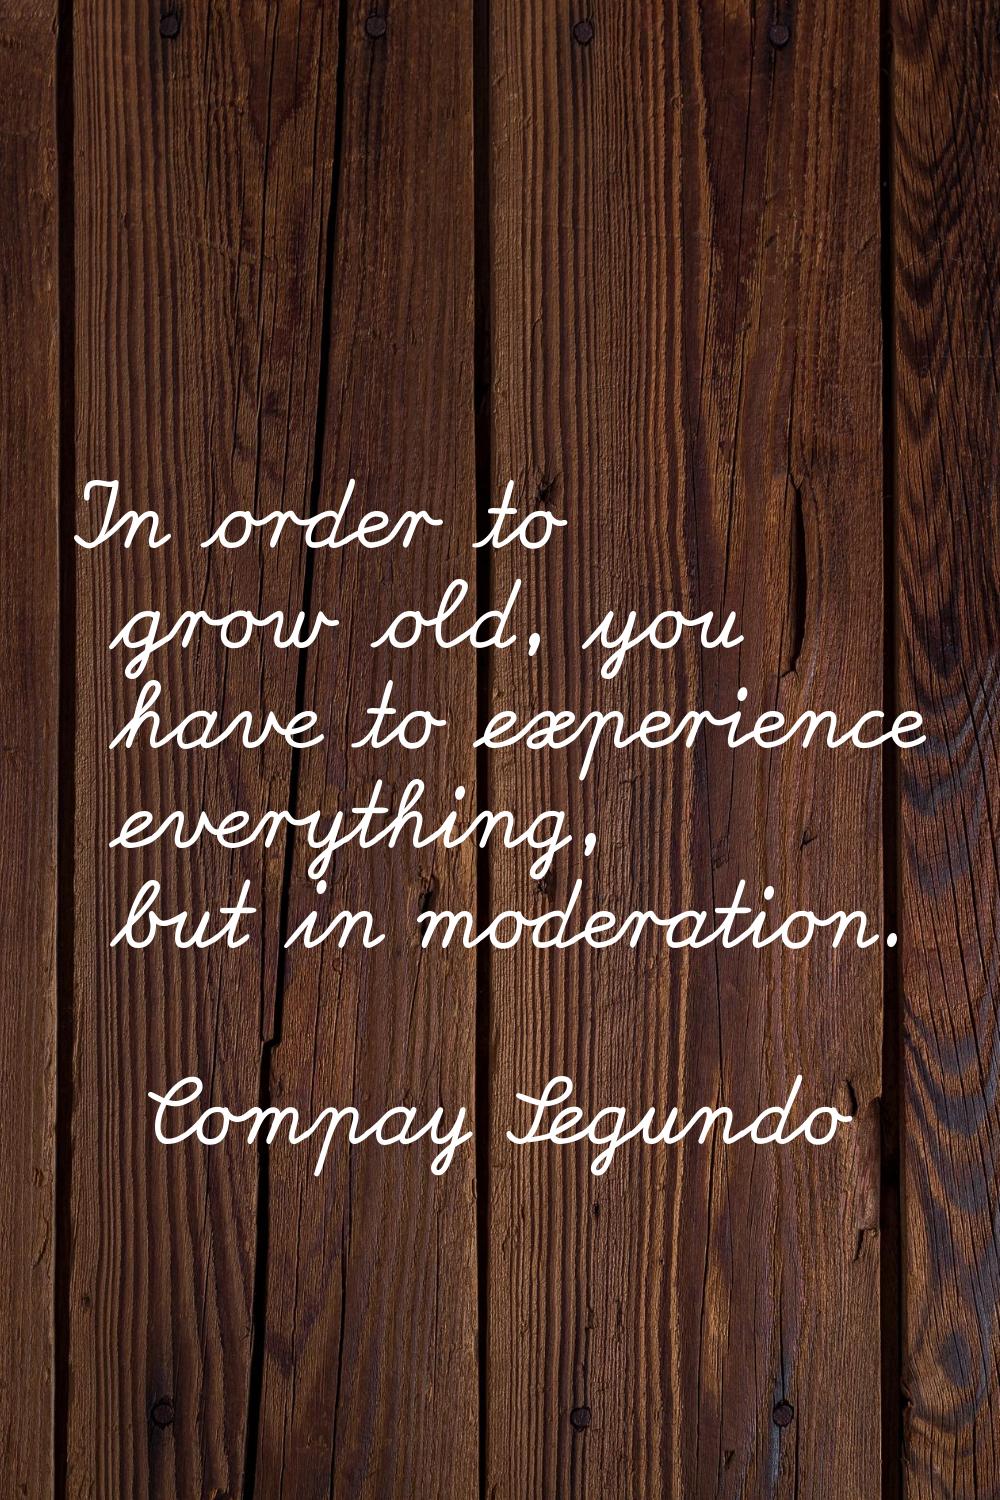 In order to grow old, you have to experience everything, but in moderation.